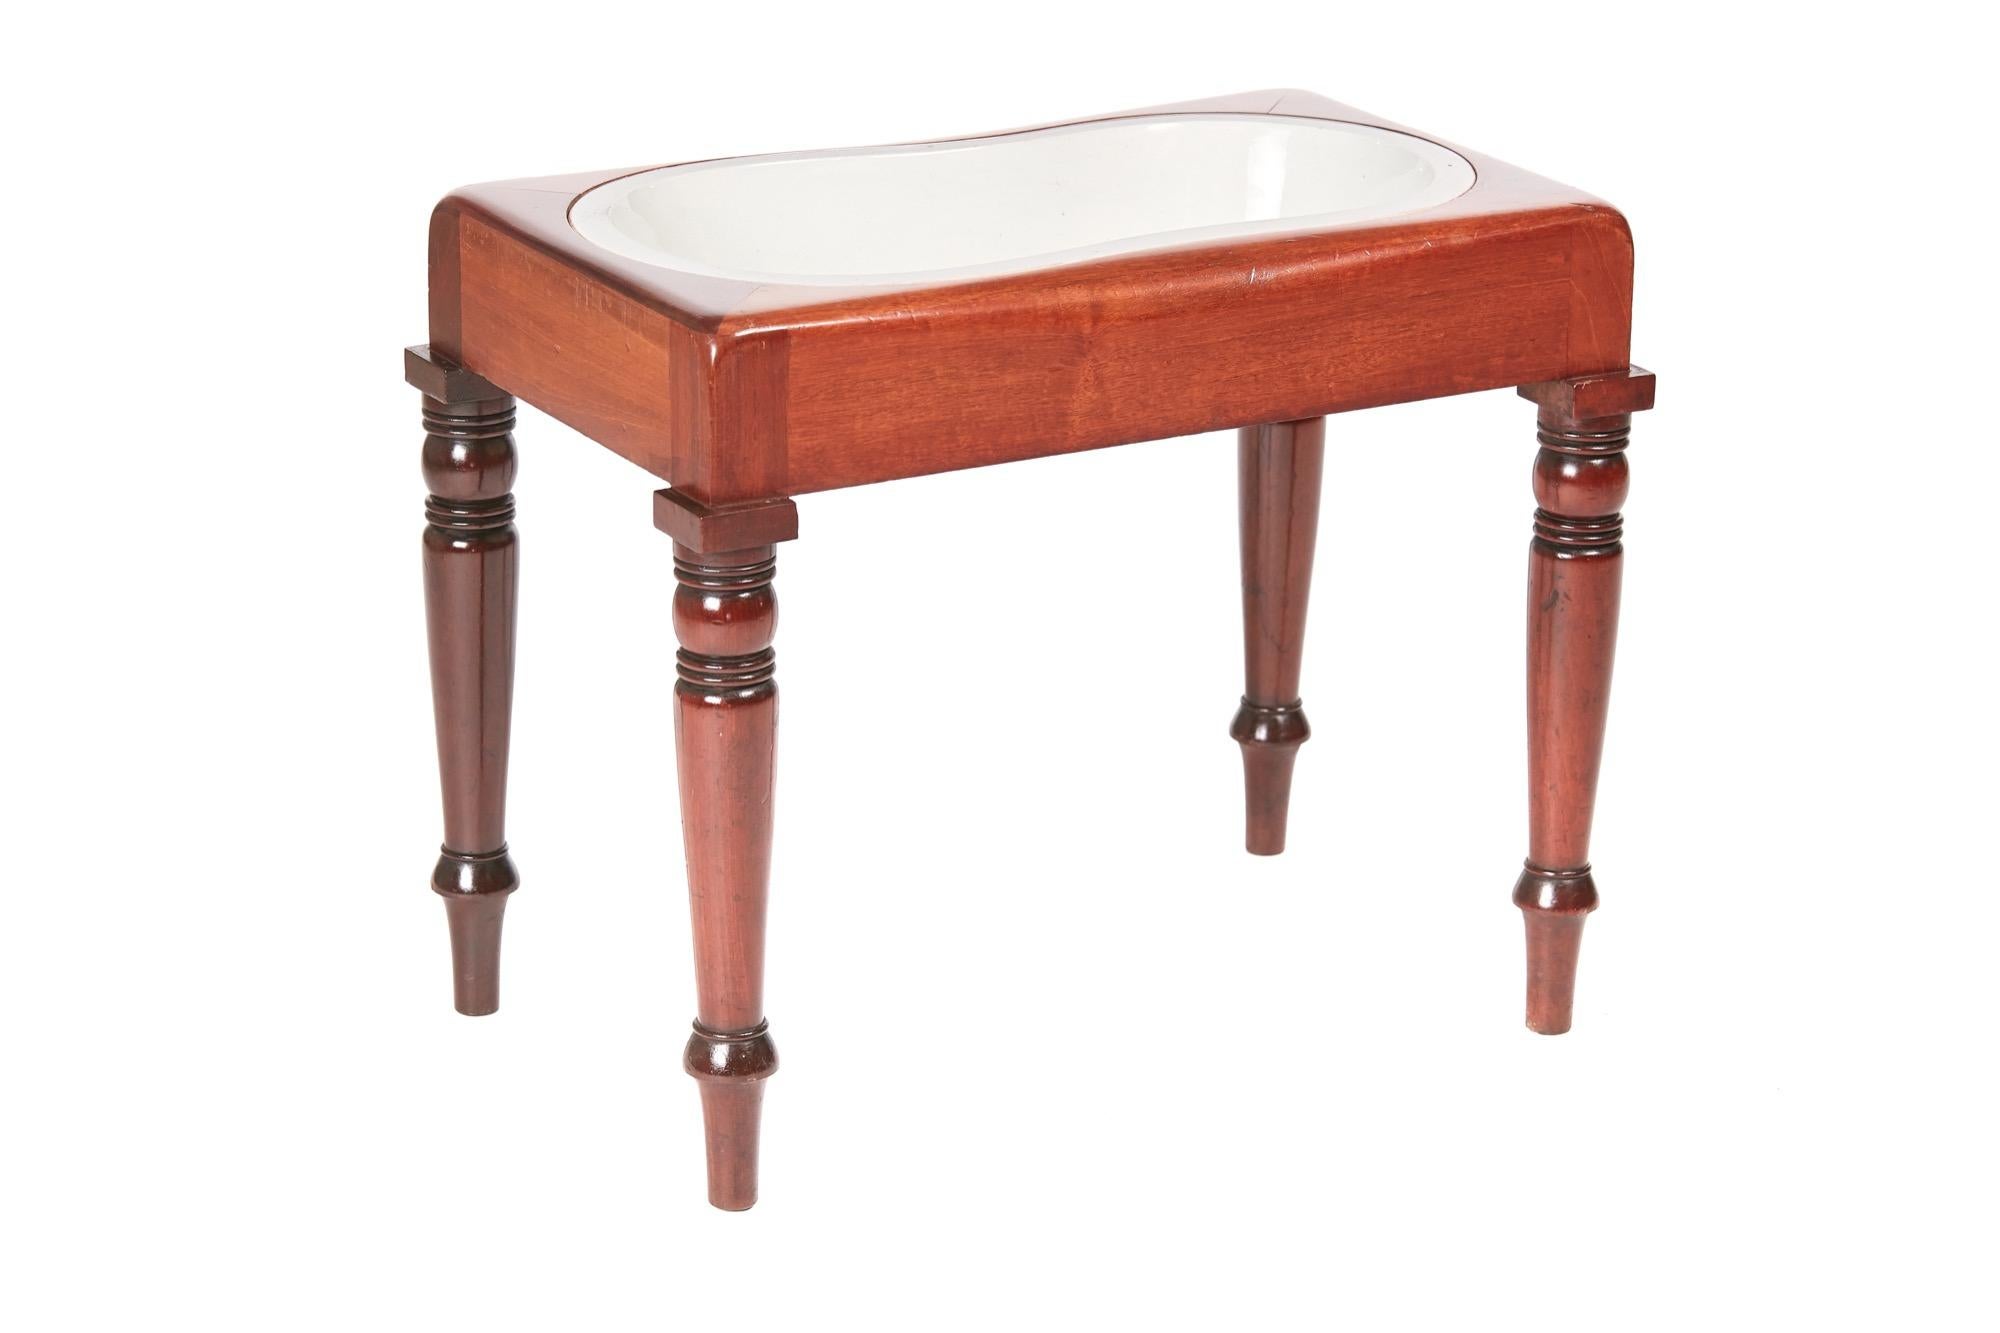 Other Victorian Antique Mahogany Bidet/Lamp Table For Sale